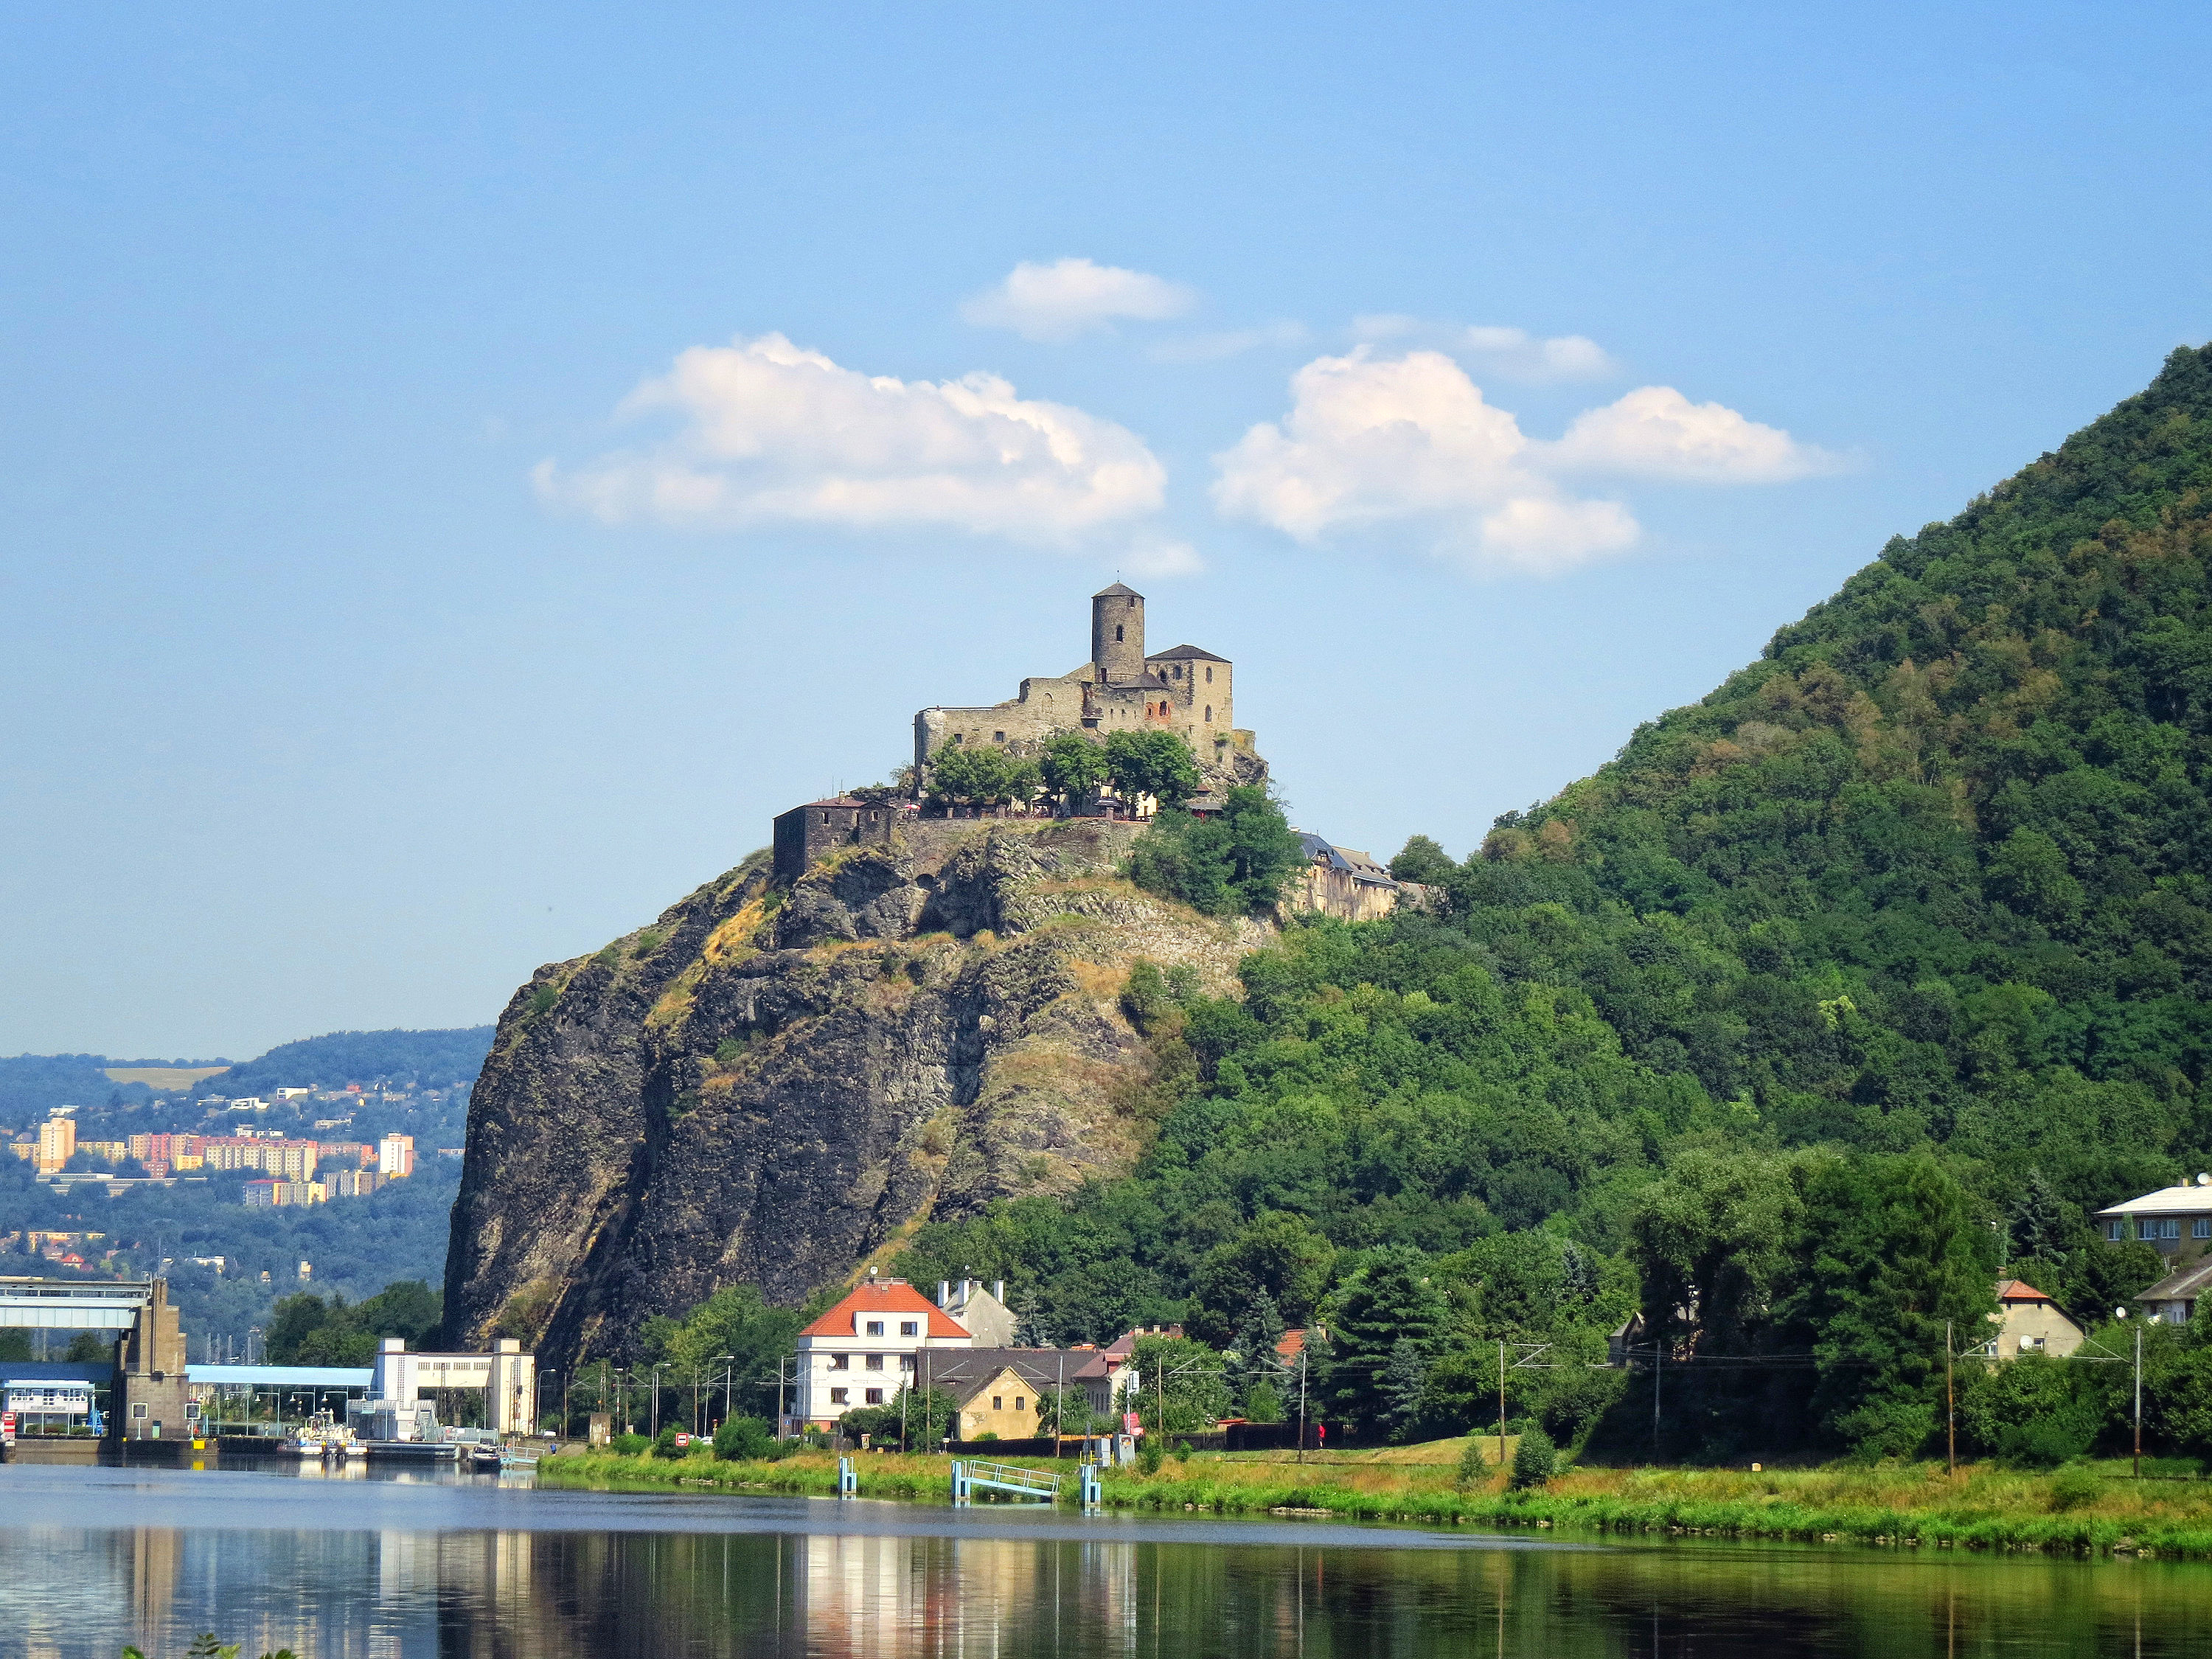 Central European scientists meet in Usti nad Labem